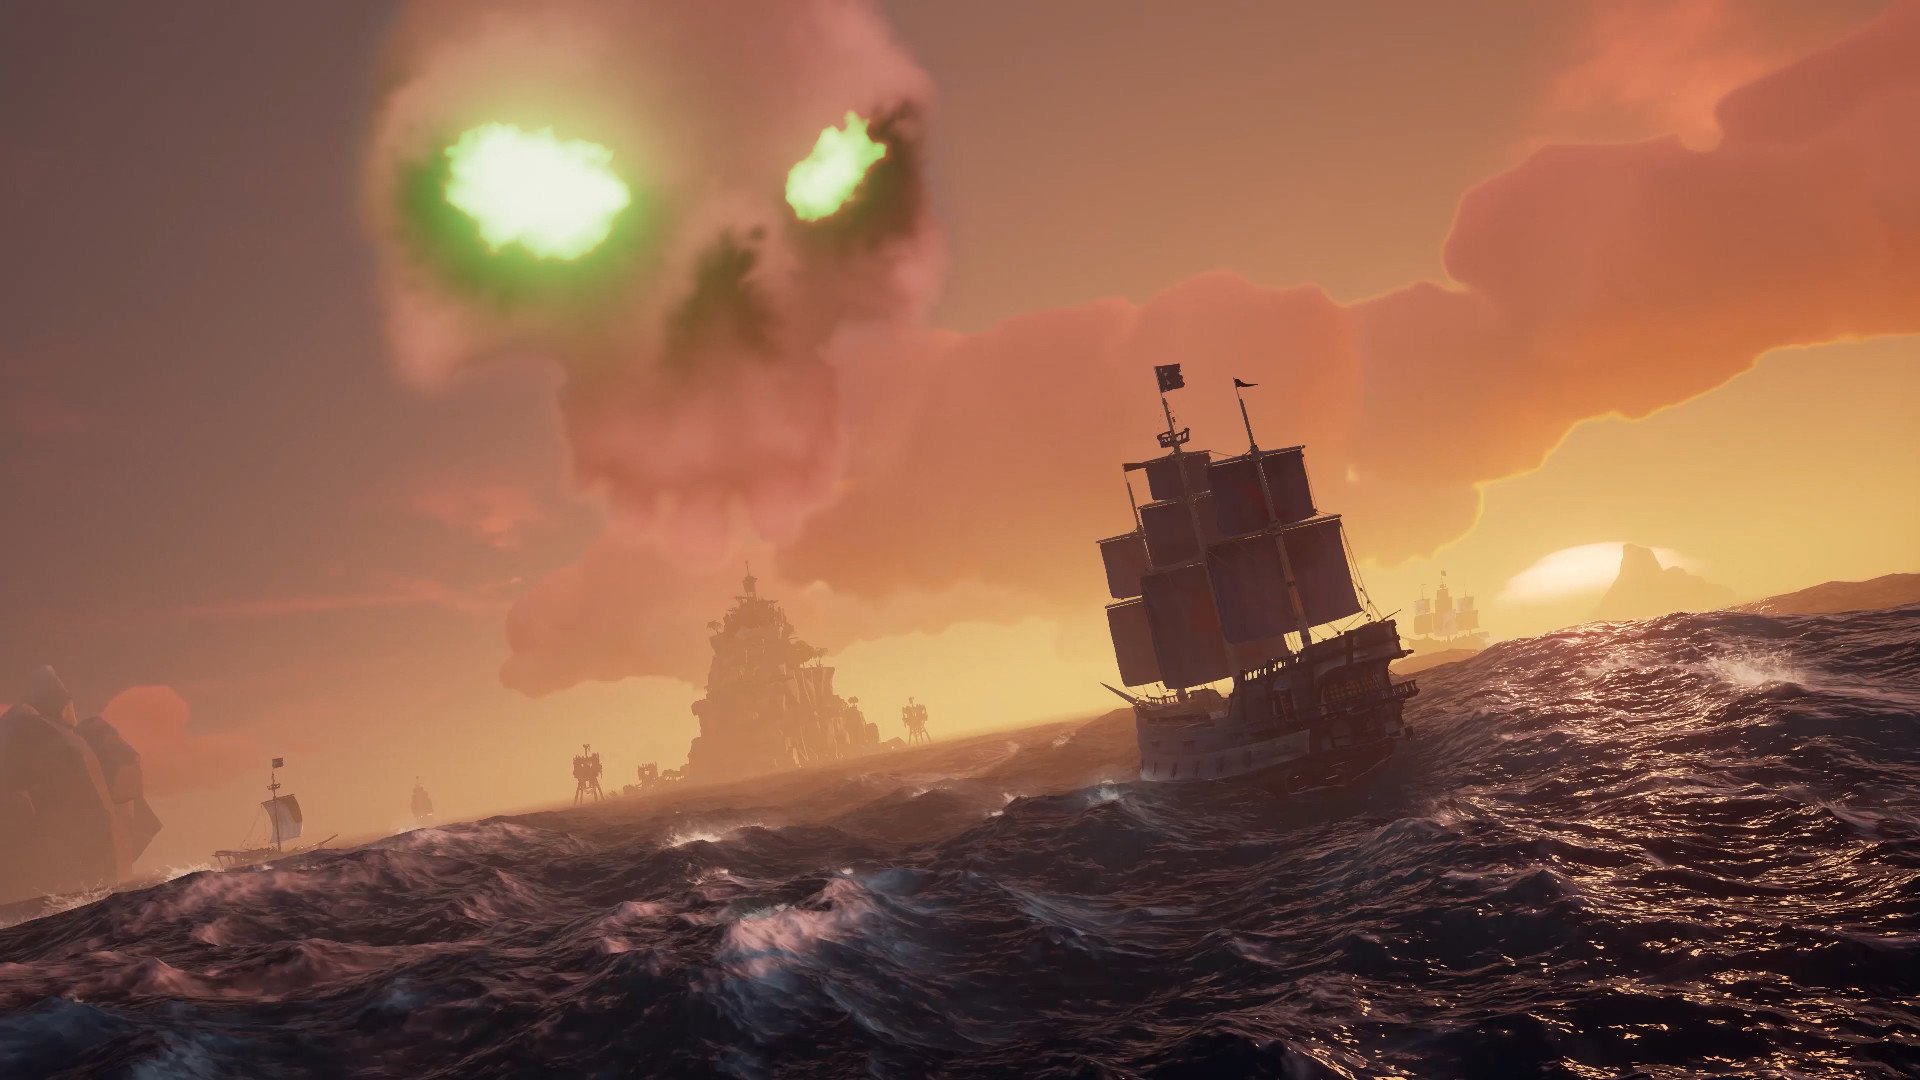 Xbox’s Sea of Thieves was PS5’s most downloaded recreation in Might